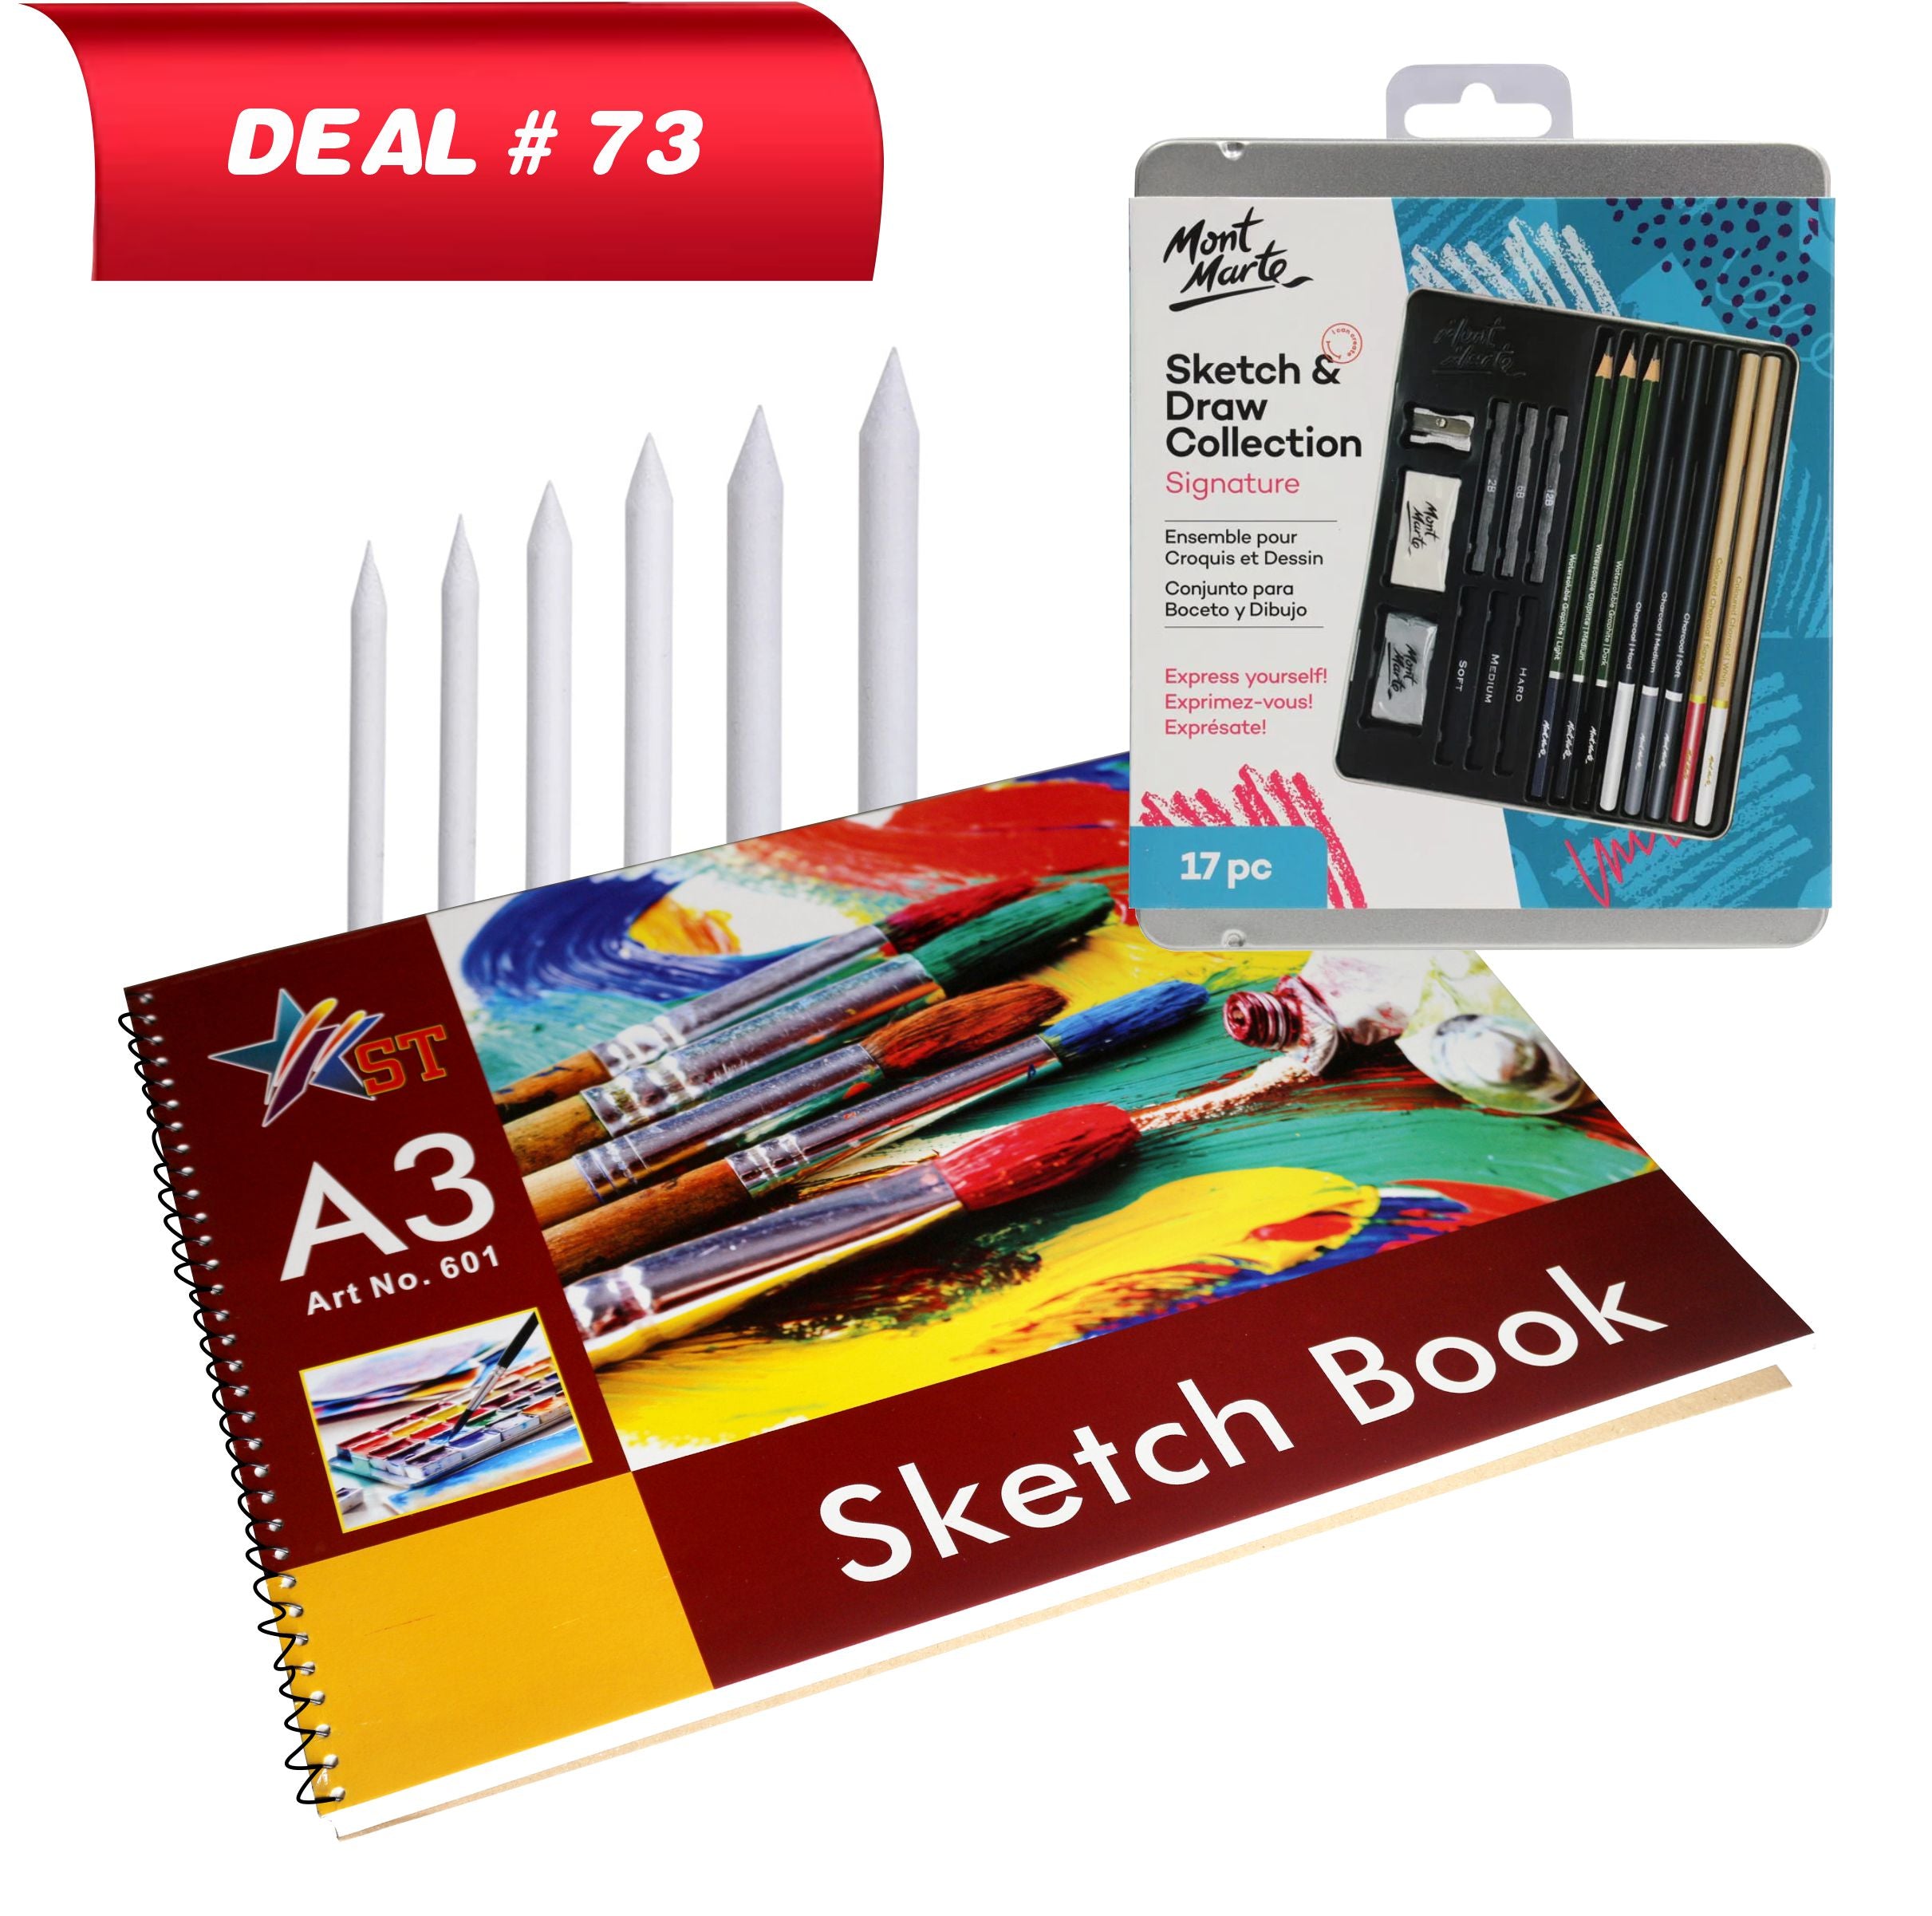 Sketching Kit For Artist, Deal No.73